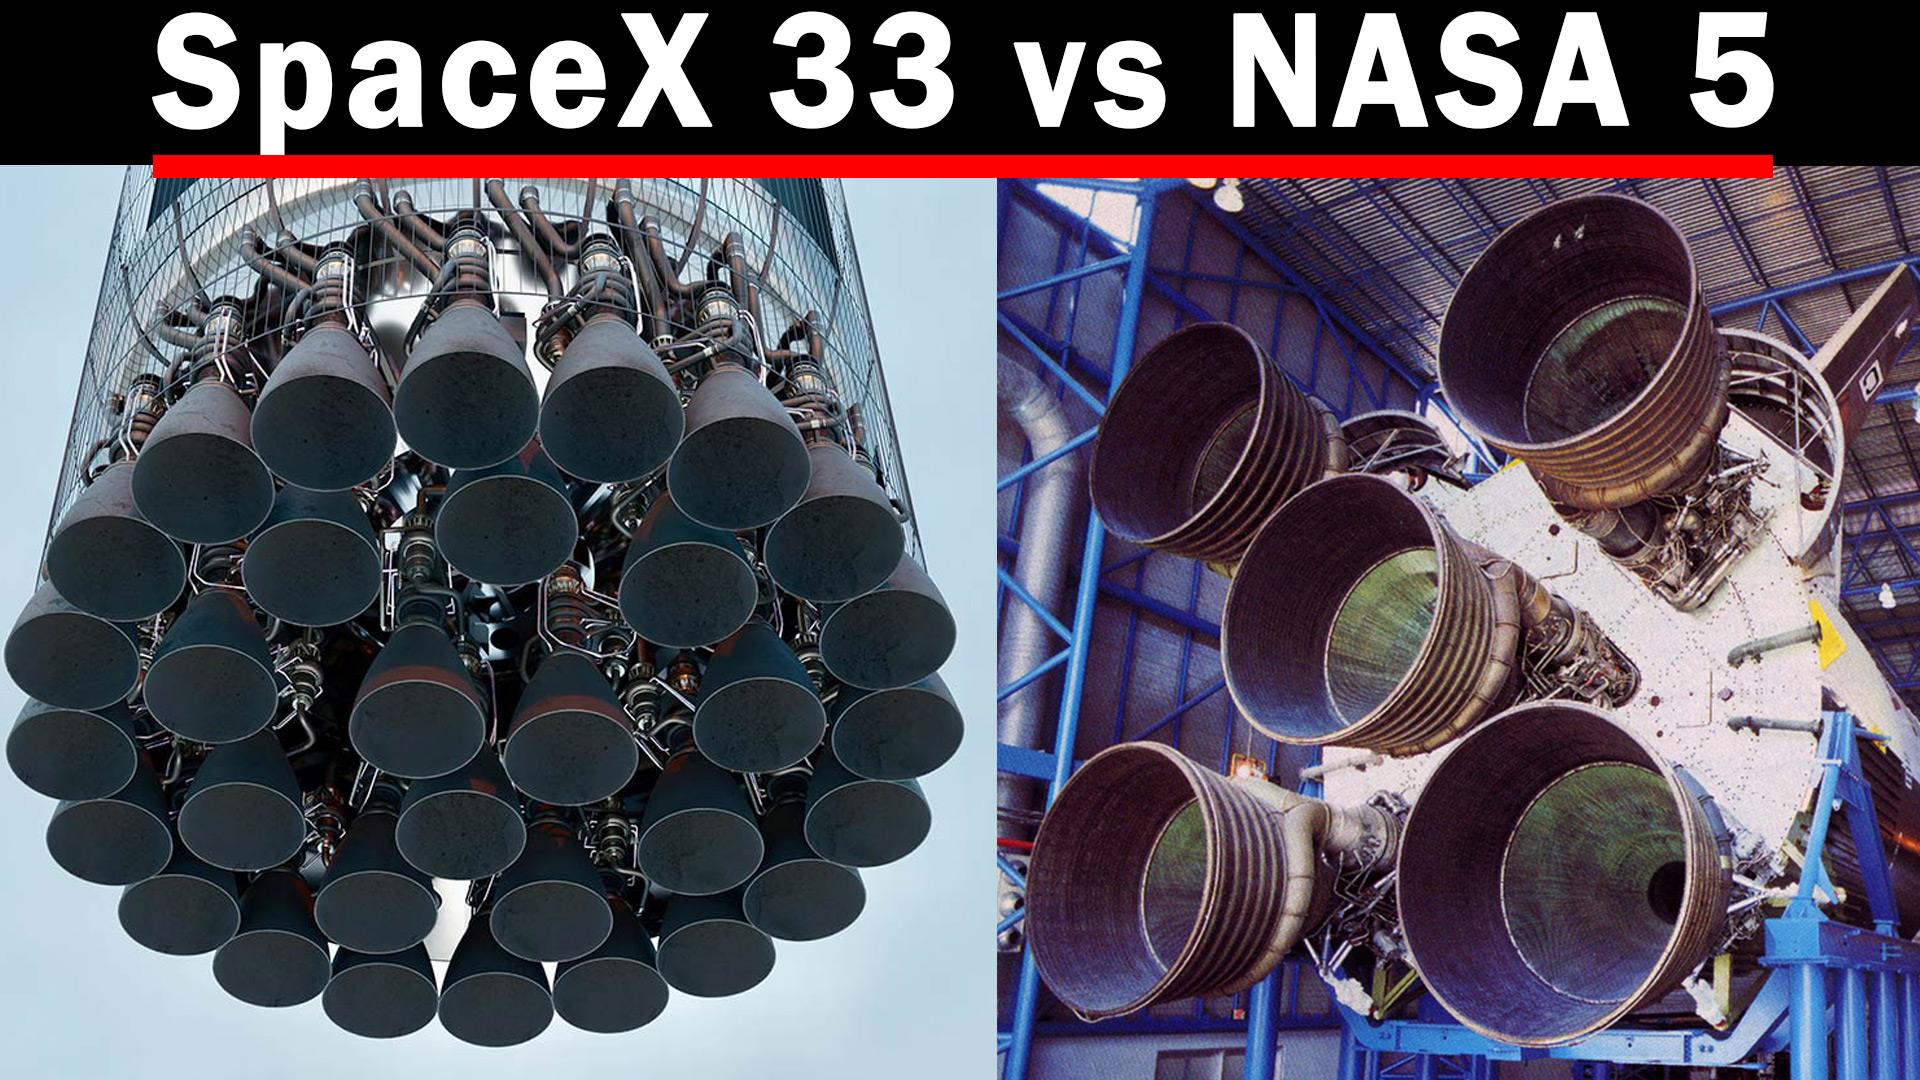 Why does Starship use so many engines compared to the Saturn V